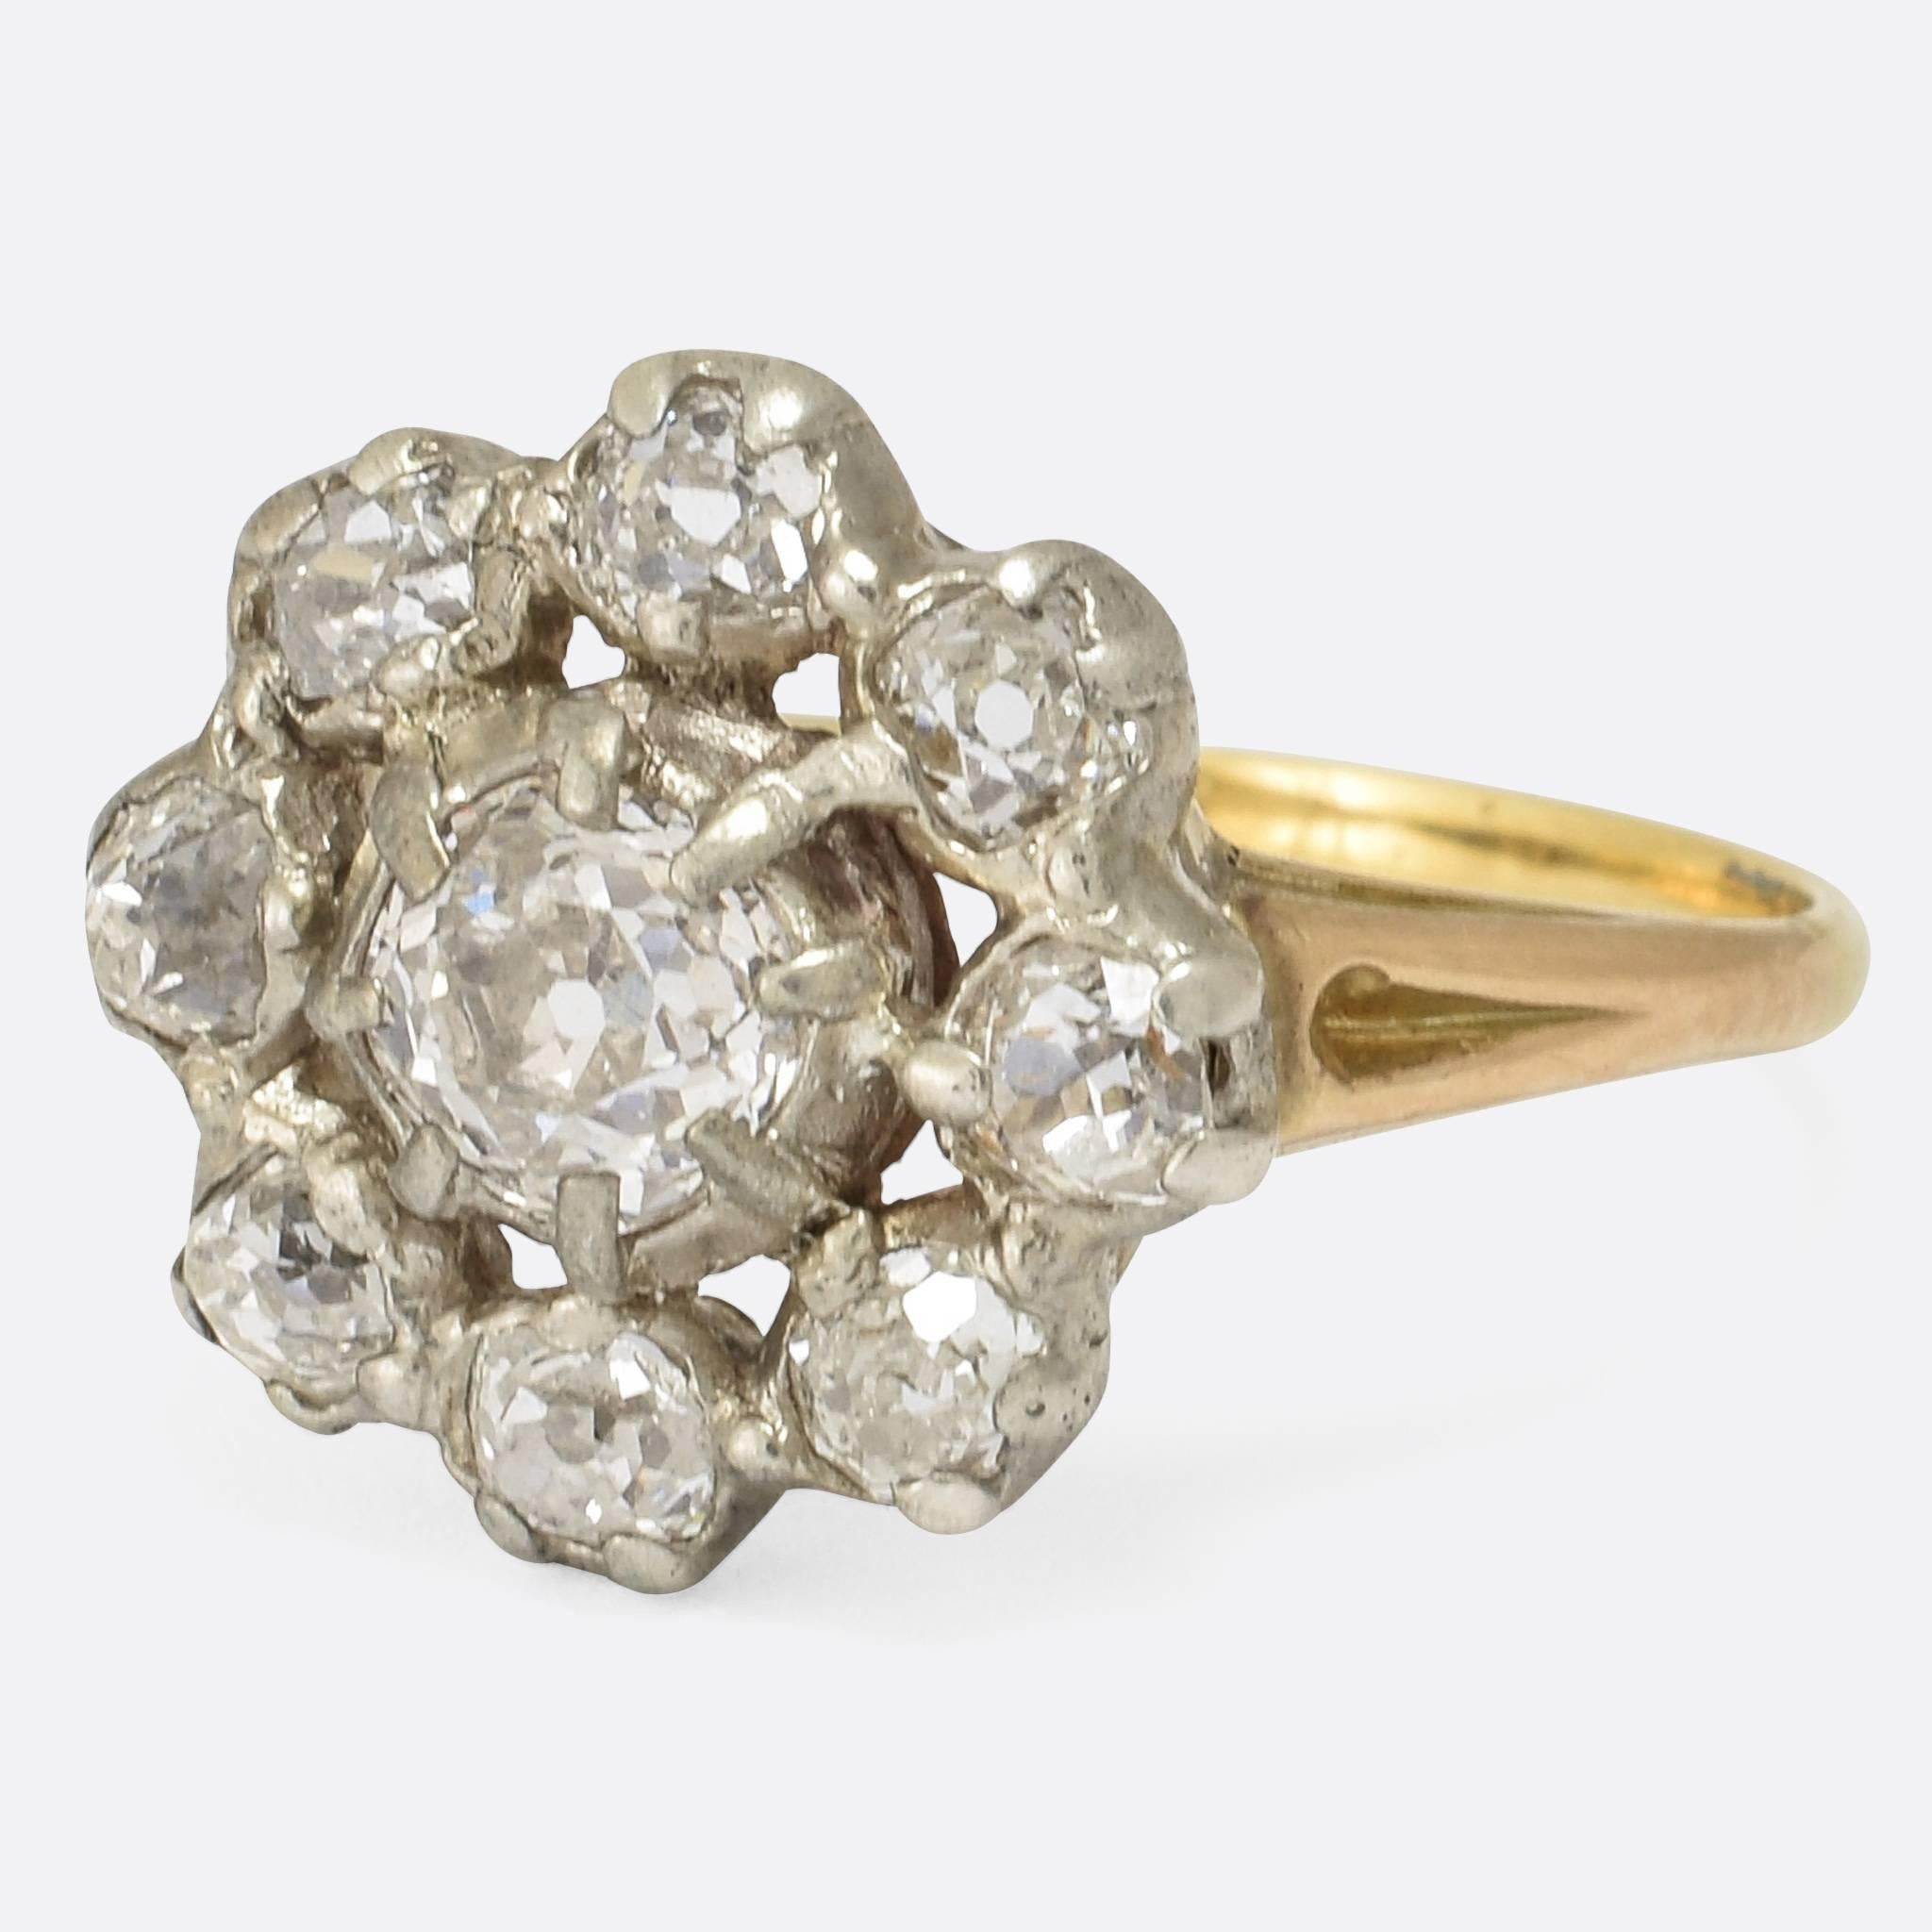 This stunning antique cluster ring dates to the late Georgian period. It's set with a carat and a half of bright old mine cut diamonds (8x .12ct stones surrounding a central .55ct stone). The diamonds remain in their original silver settings - very